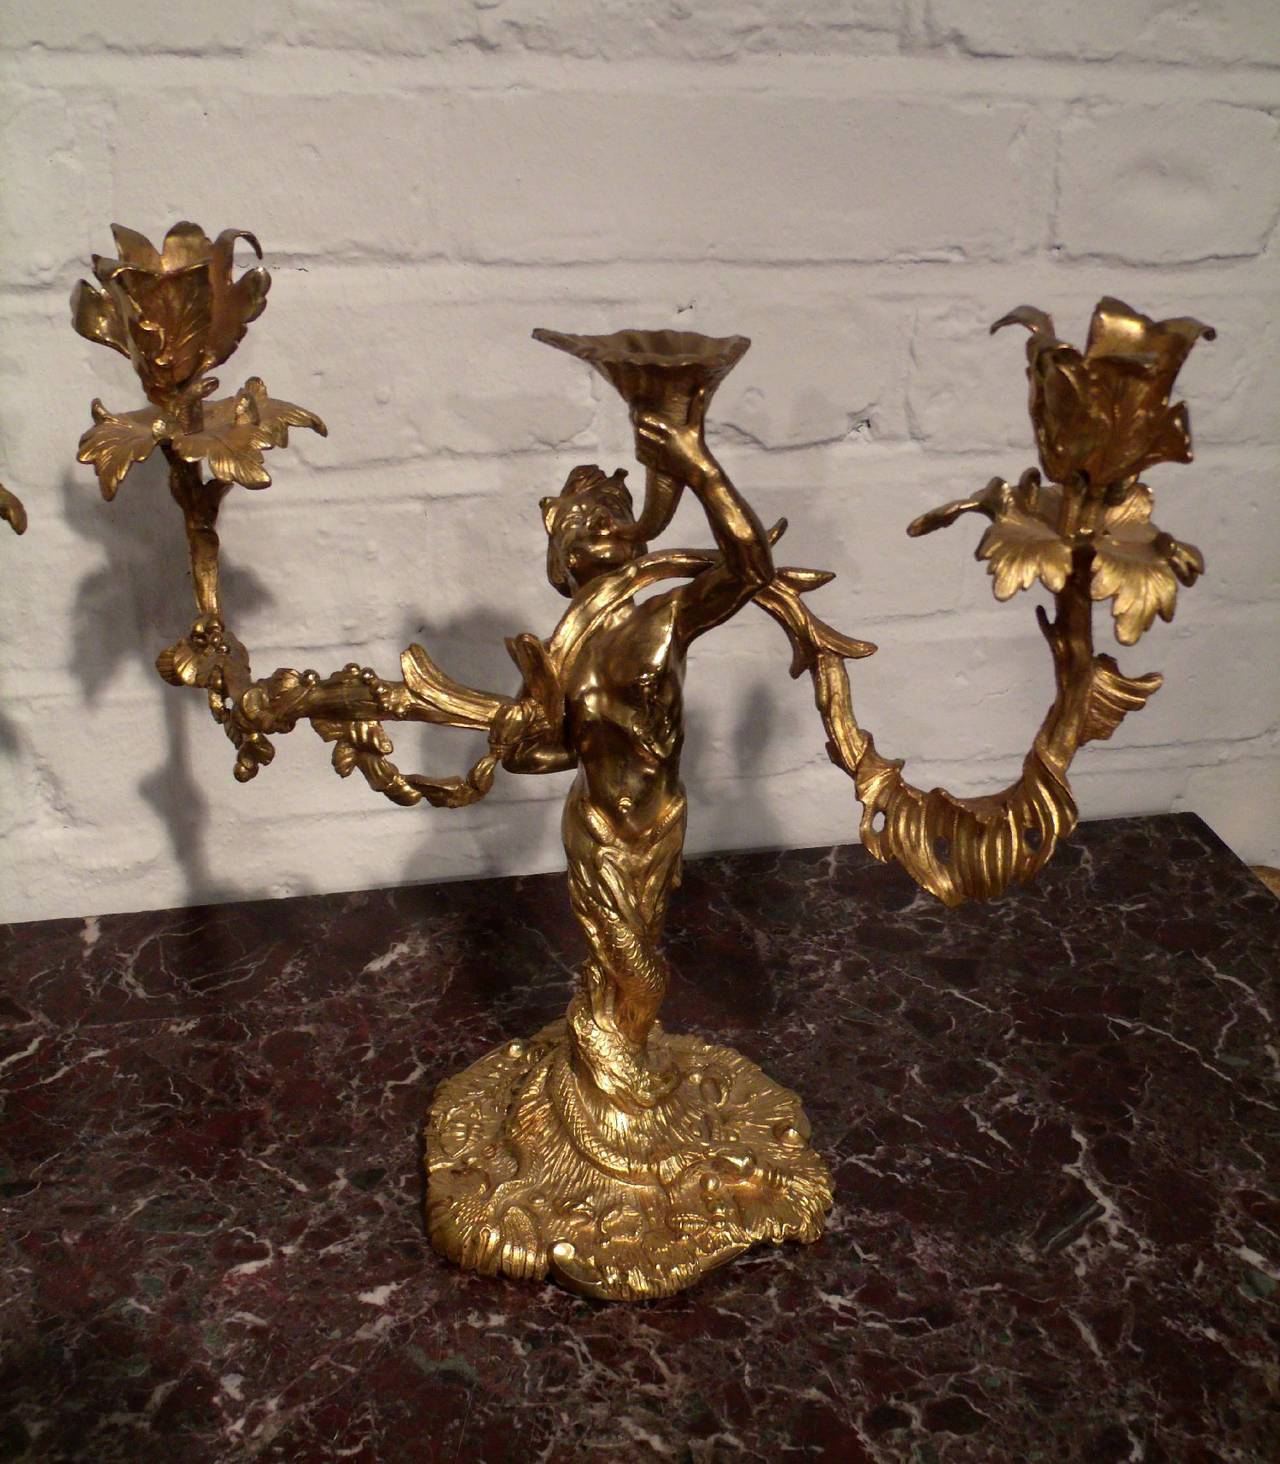 A very ornate and detailed pair of French ormolu double branch table candelabras in the form of mermen. The candelabras are stamped with the makers mark and measure 14 in – 35.5 cm wide, 11 ½ in – 29.2 cm high and approximately 6 in – 15 cm deep.